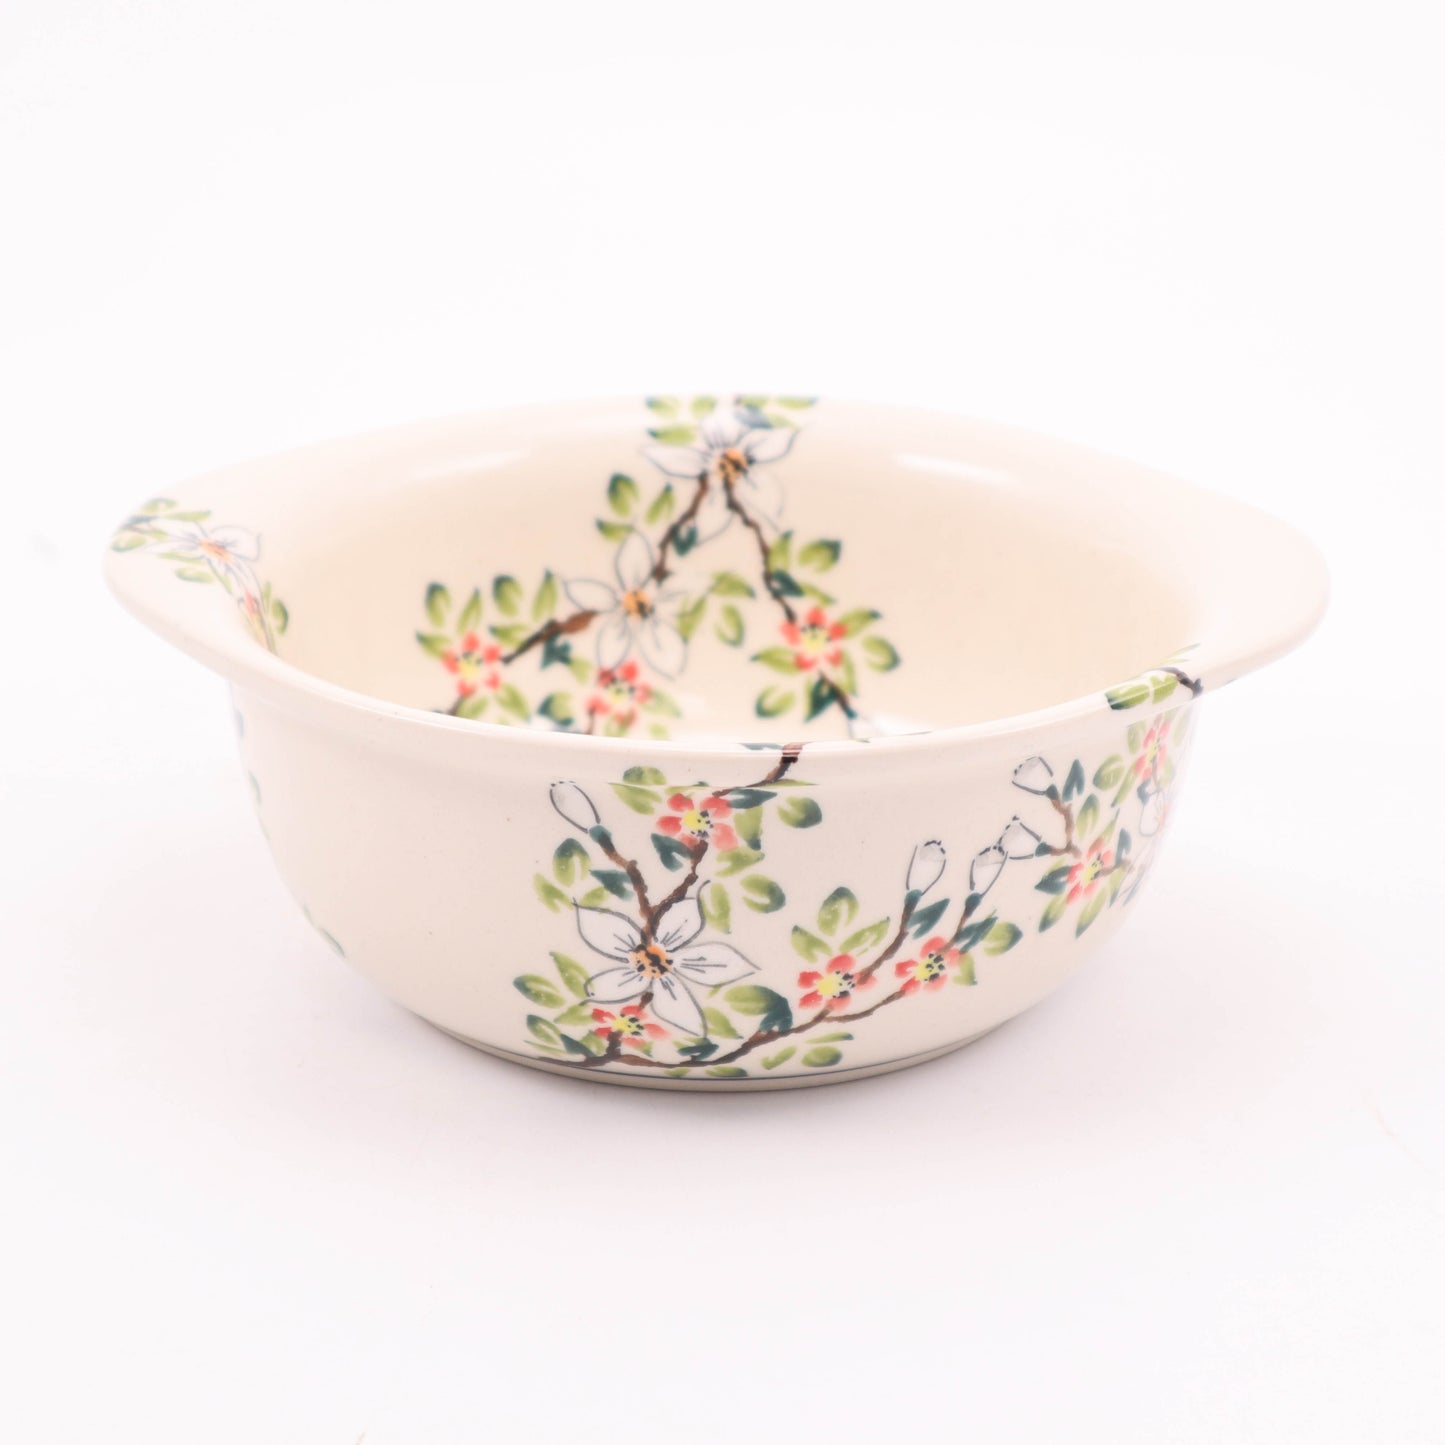 6.5" Soup Bowl with Handles. Pattern: Apple Blossom Red